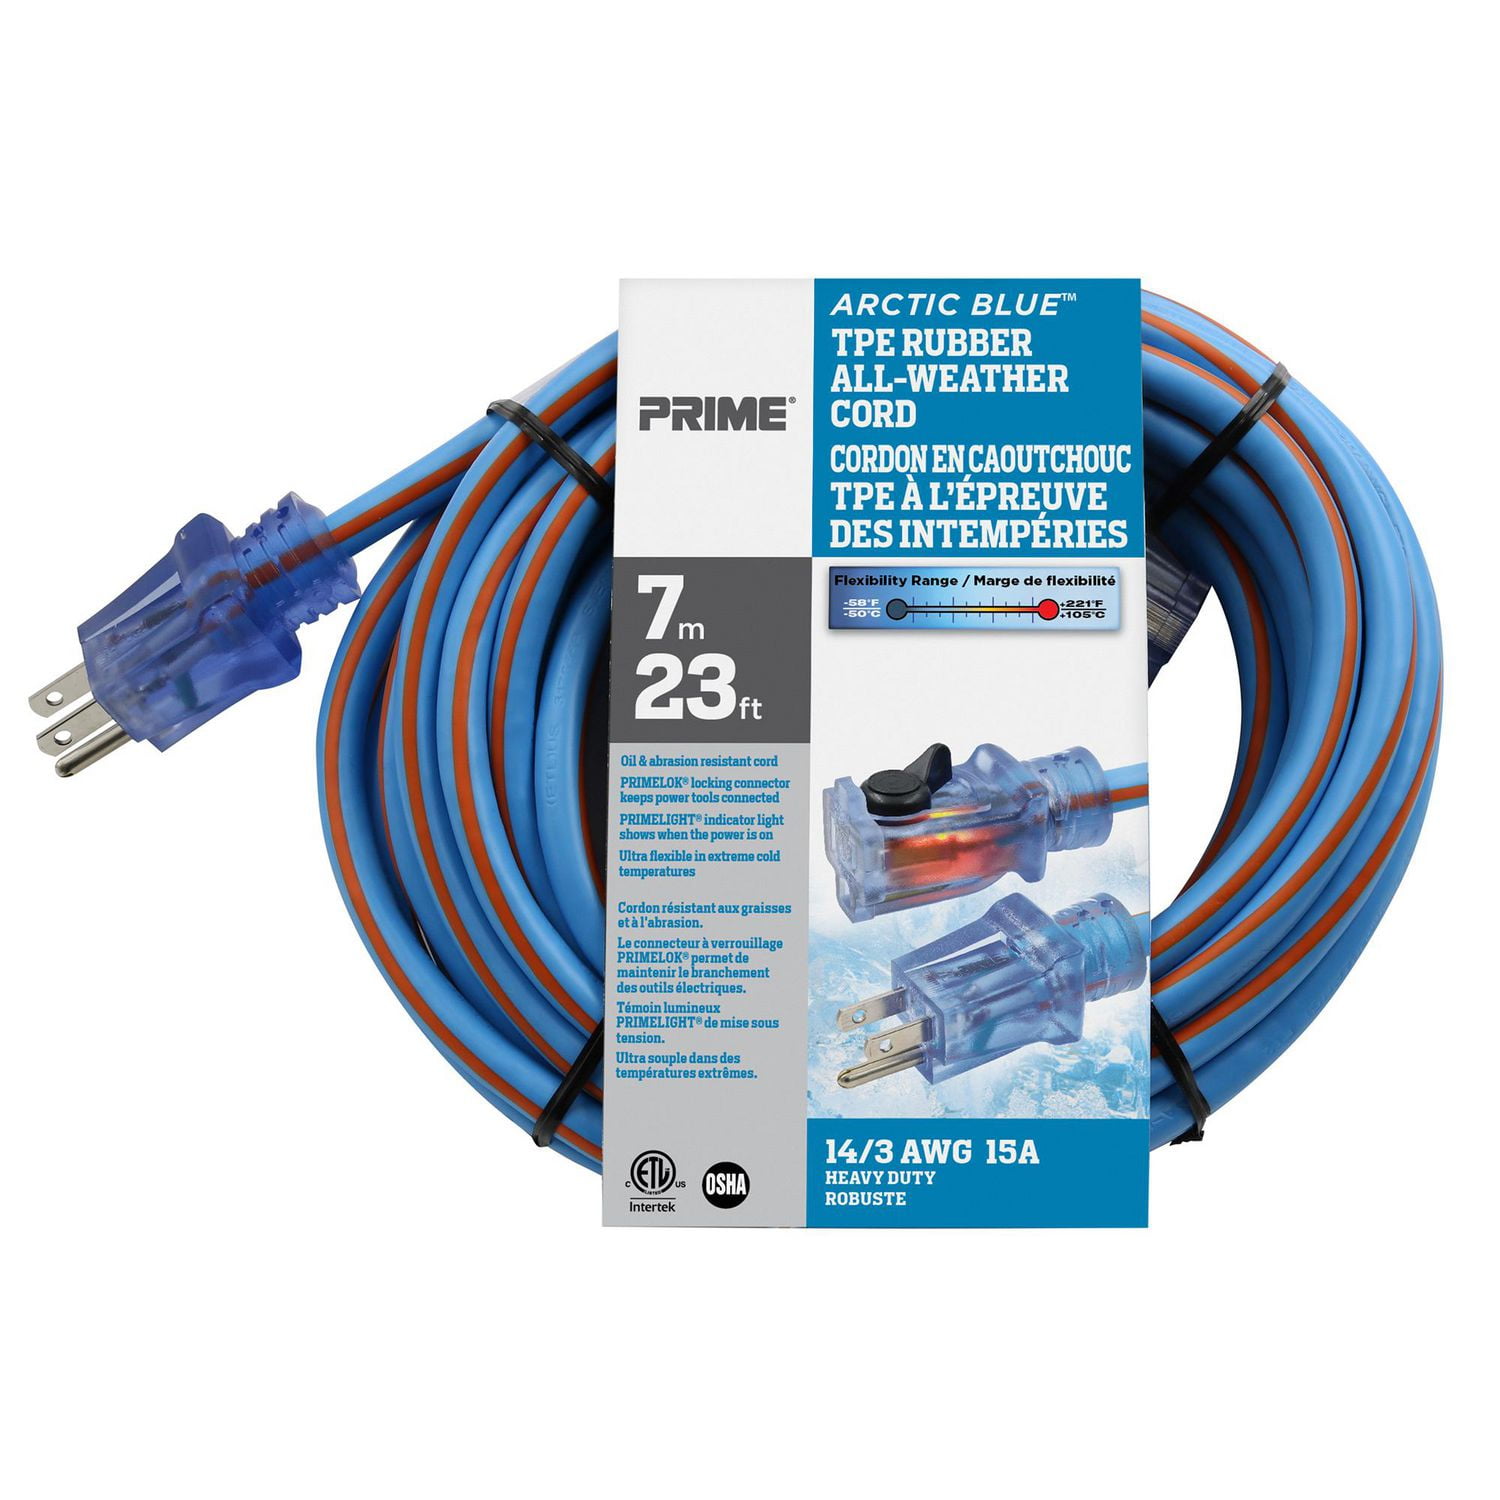 Prime 7m Arctic Blue All-Weather Extension Cord, 7m (22.6 Ft) 14/3